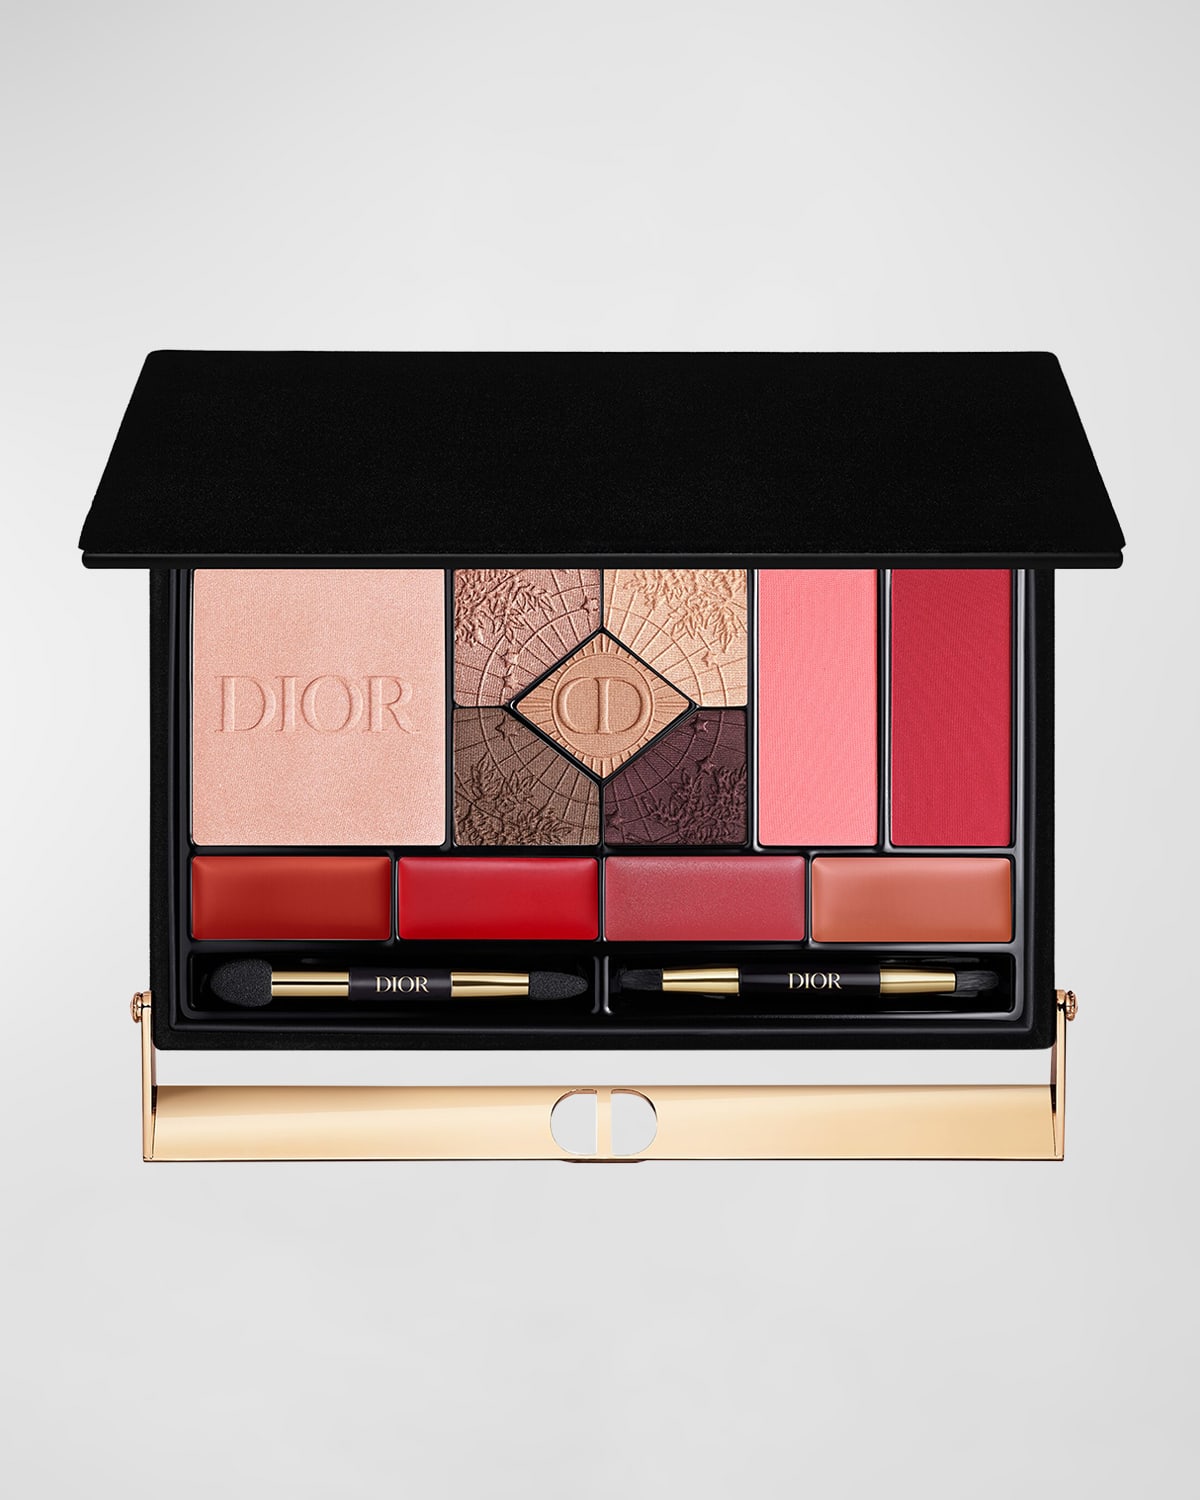 Dior Limited Edition All-in-One Face, Lip & Eye Makeup Palette